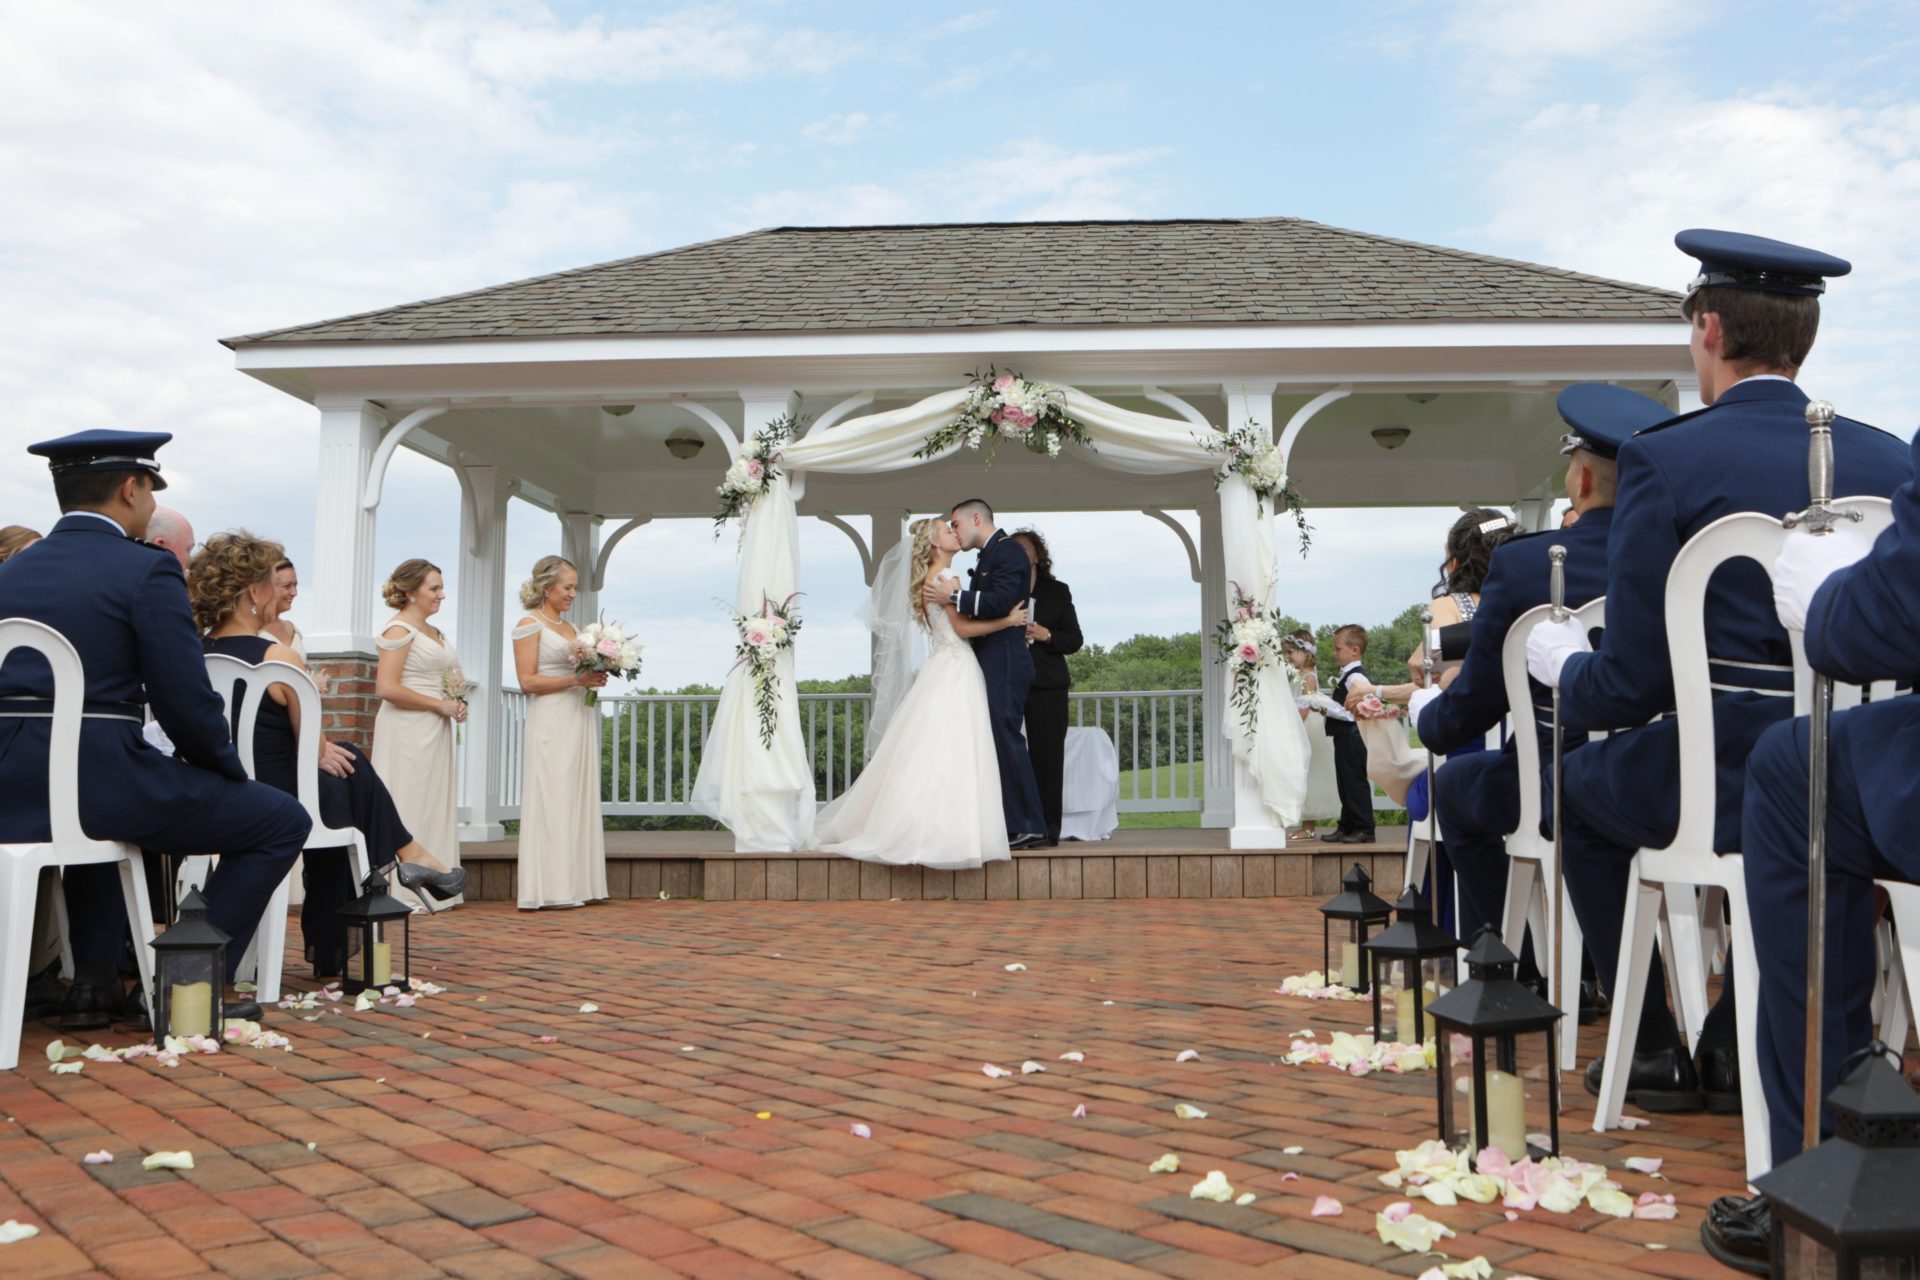 Bride and groom kiss on pavilion after outdoor wedding ceremony in Maryland